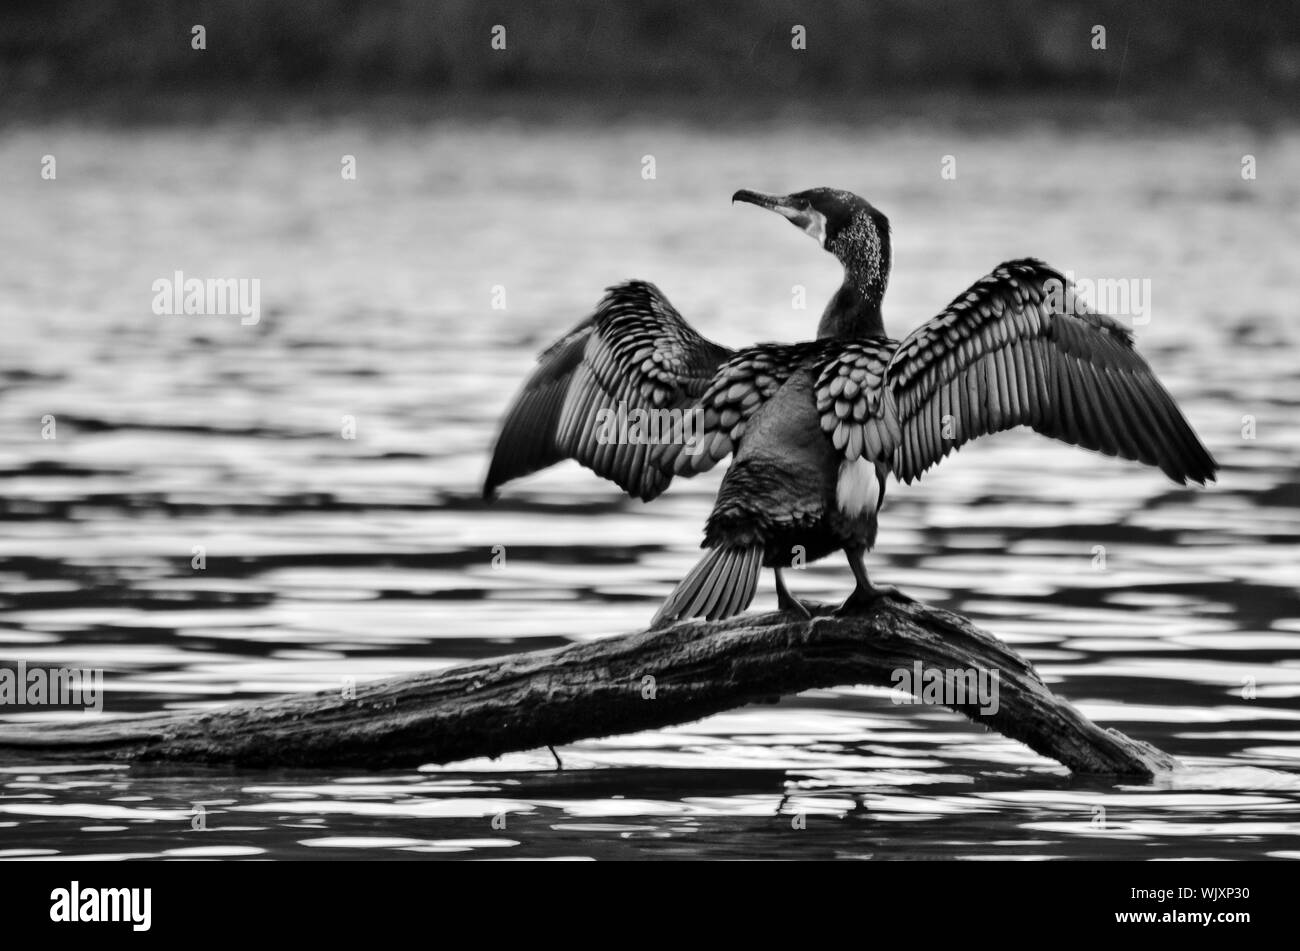 Full Length Of Cormorant With Spread Wings Perching On Branch In Lake Stock Photo